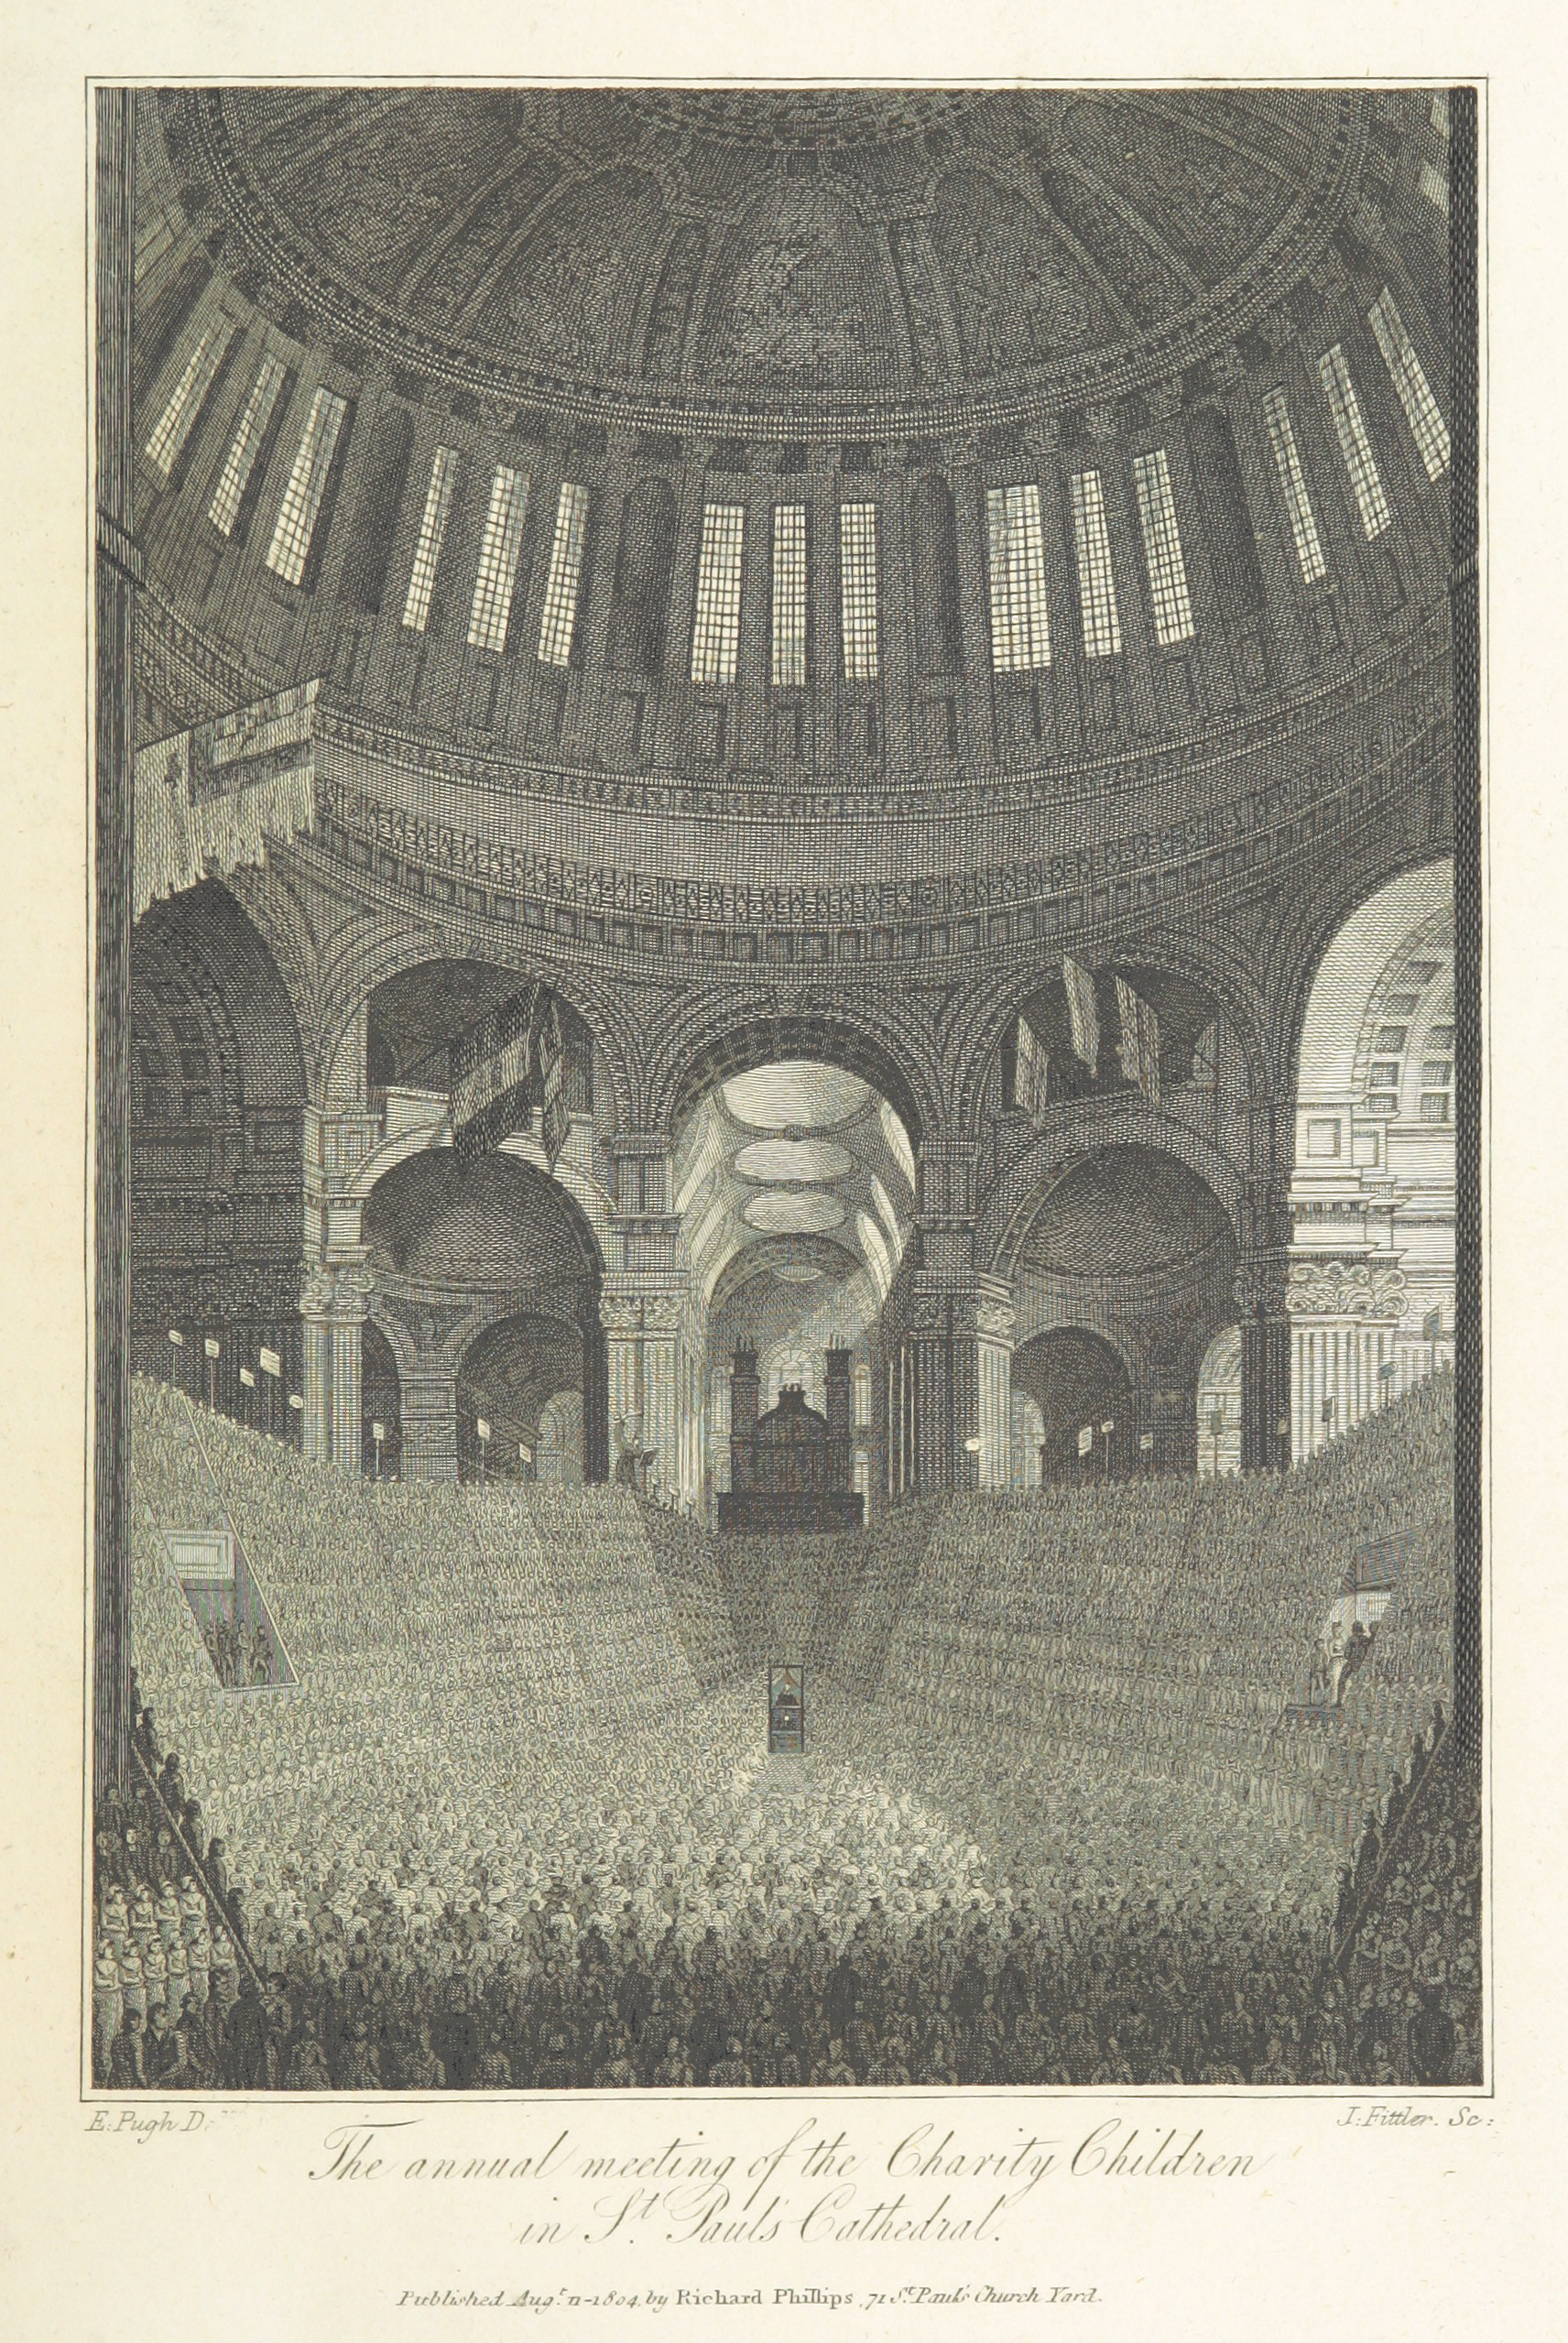 Phillips(1804)_p405_-_The_annual_meeting_of_the_Charity_Children_at_St_Pauls_Cathedral